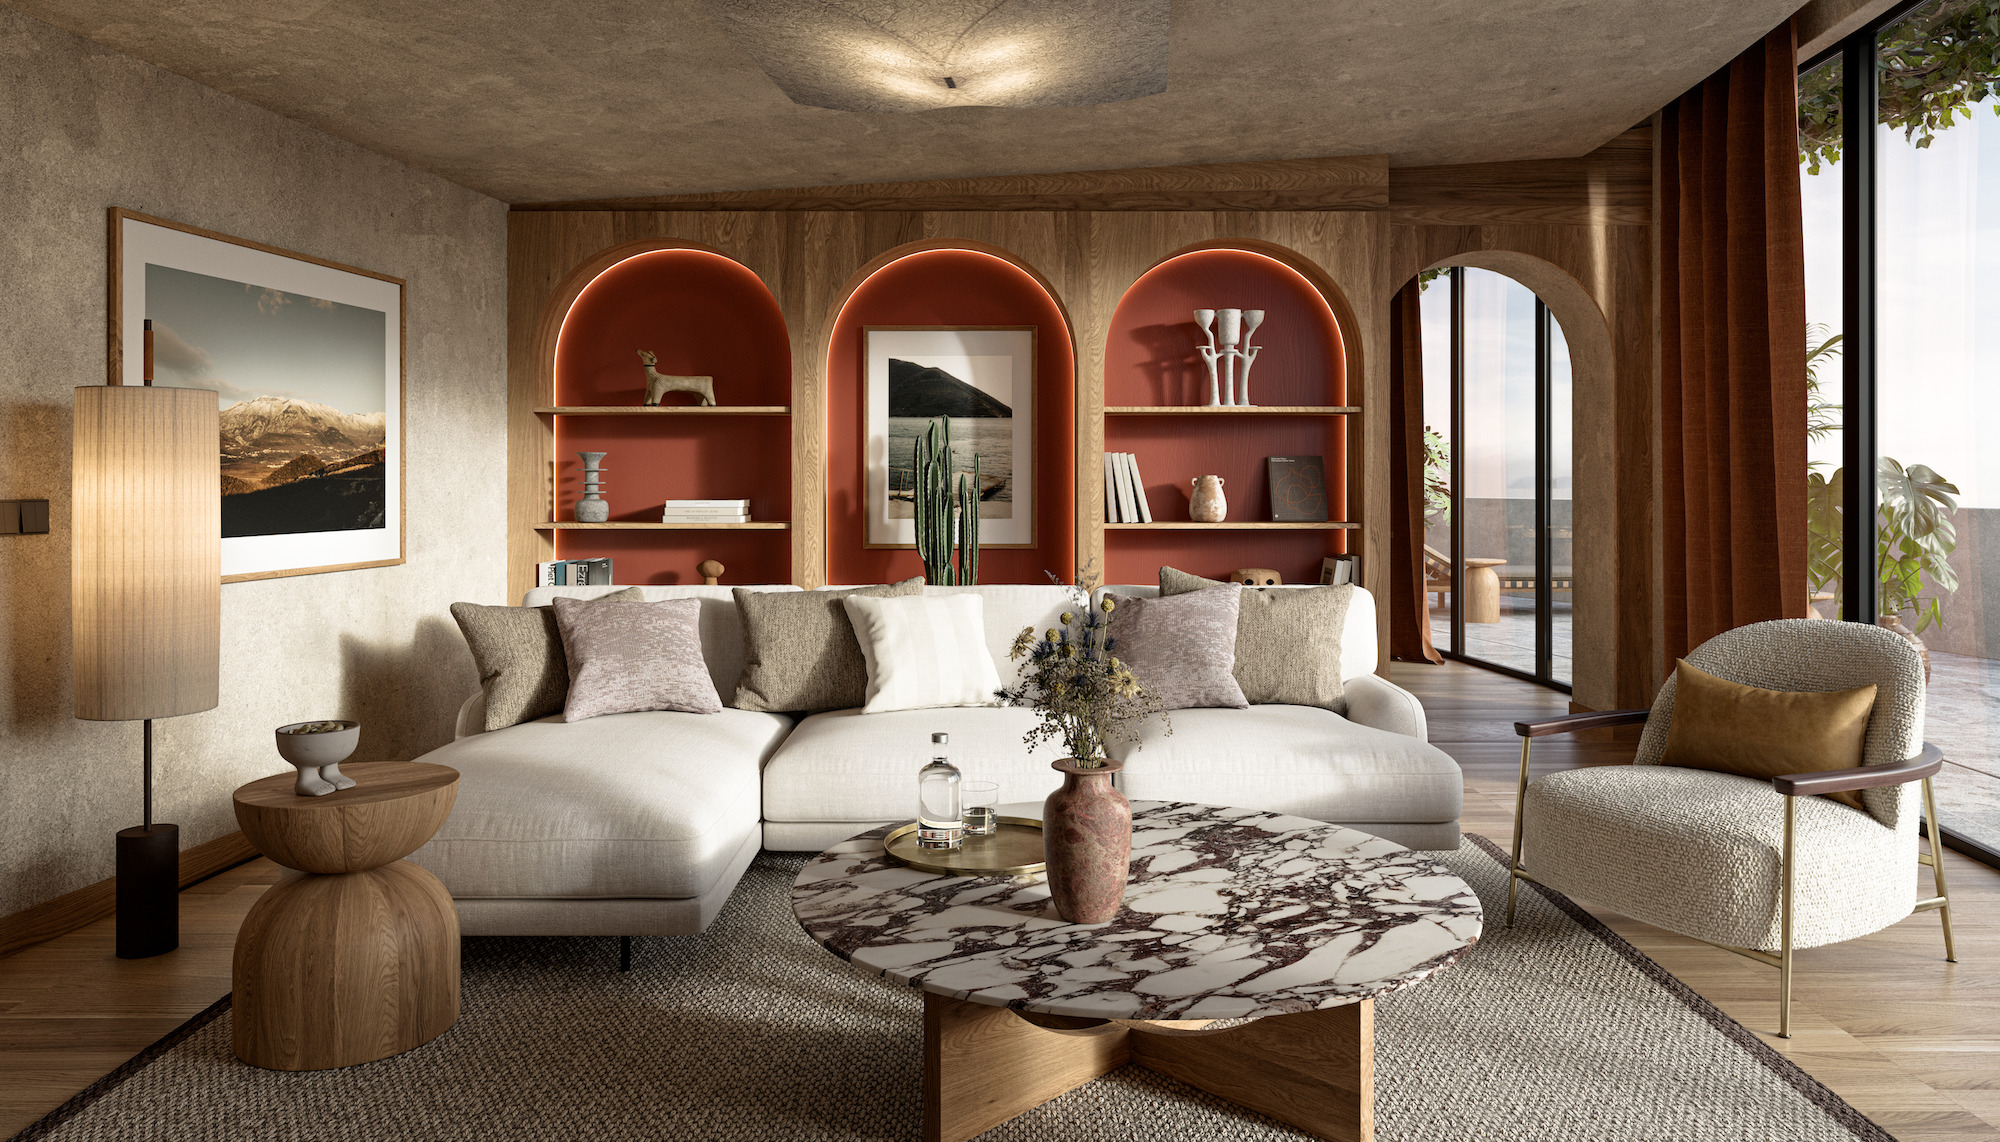 Arches are a recurring feature throughout Mamula, as are natural materials, Balkan crafts and artisanal furnishings - Effect Magazine